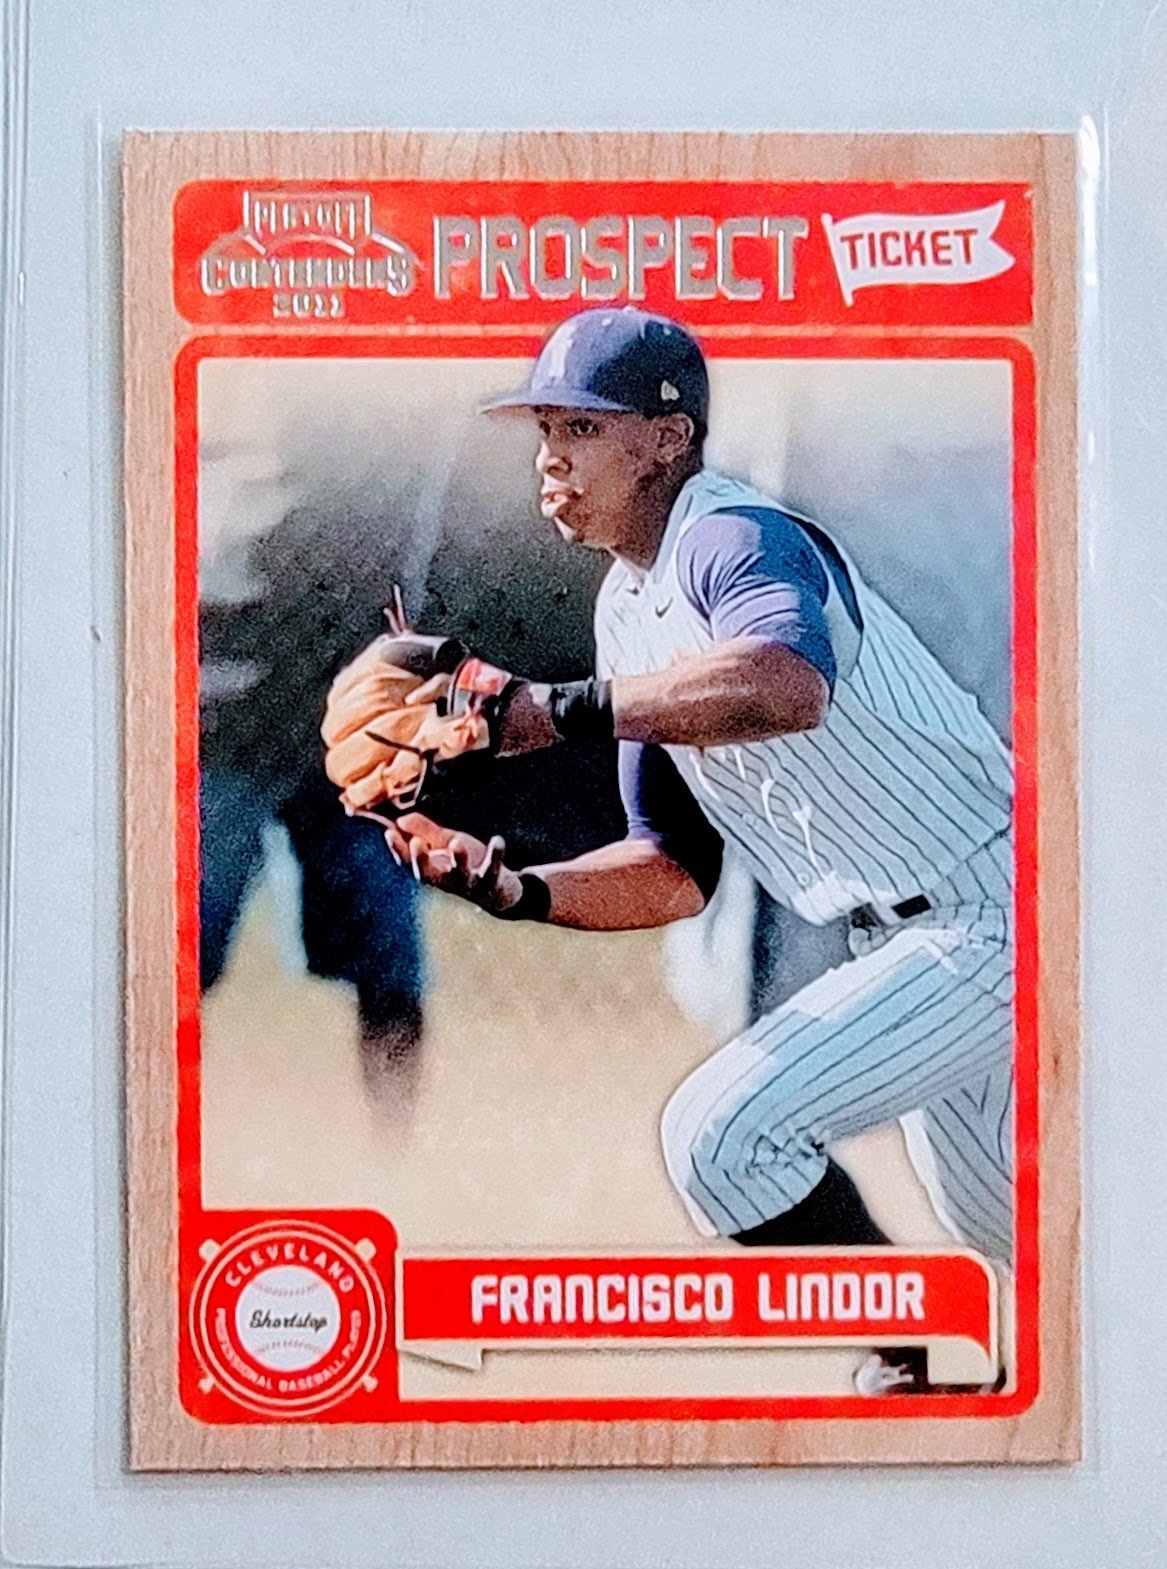 2011 Panini Playoff Contenders Francisco Lindor Prospect Ticket Baseball Card TPTV simple Xclusive Collectibles   